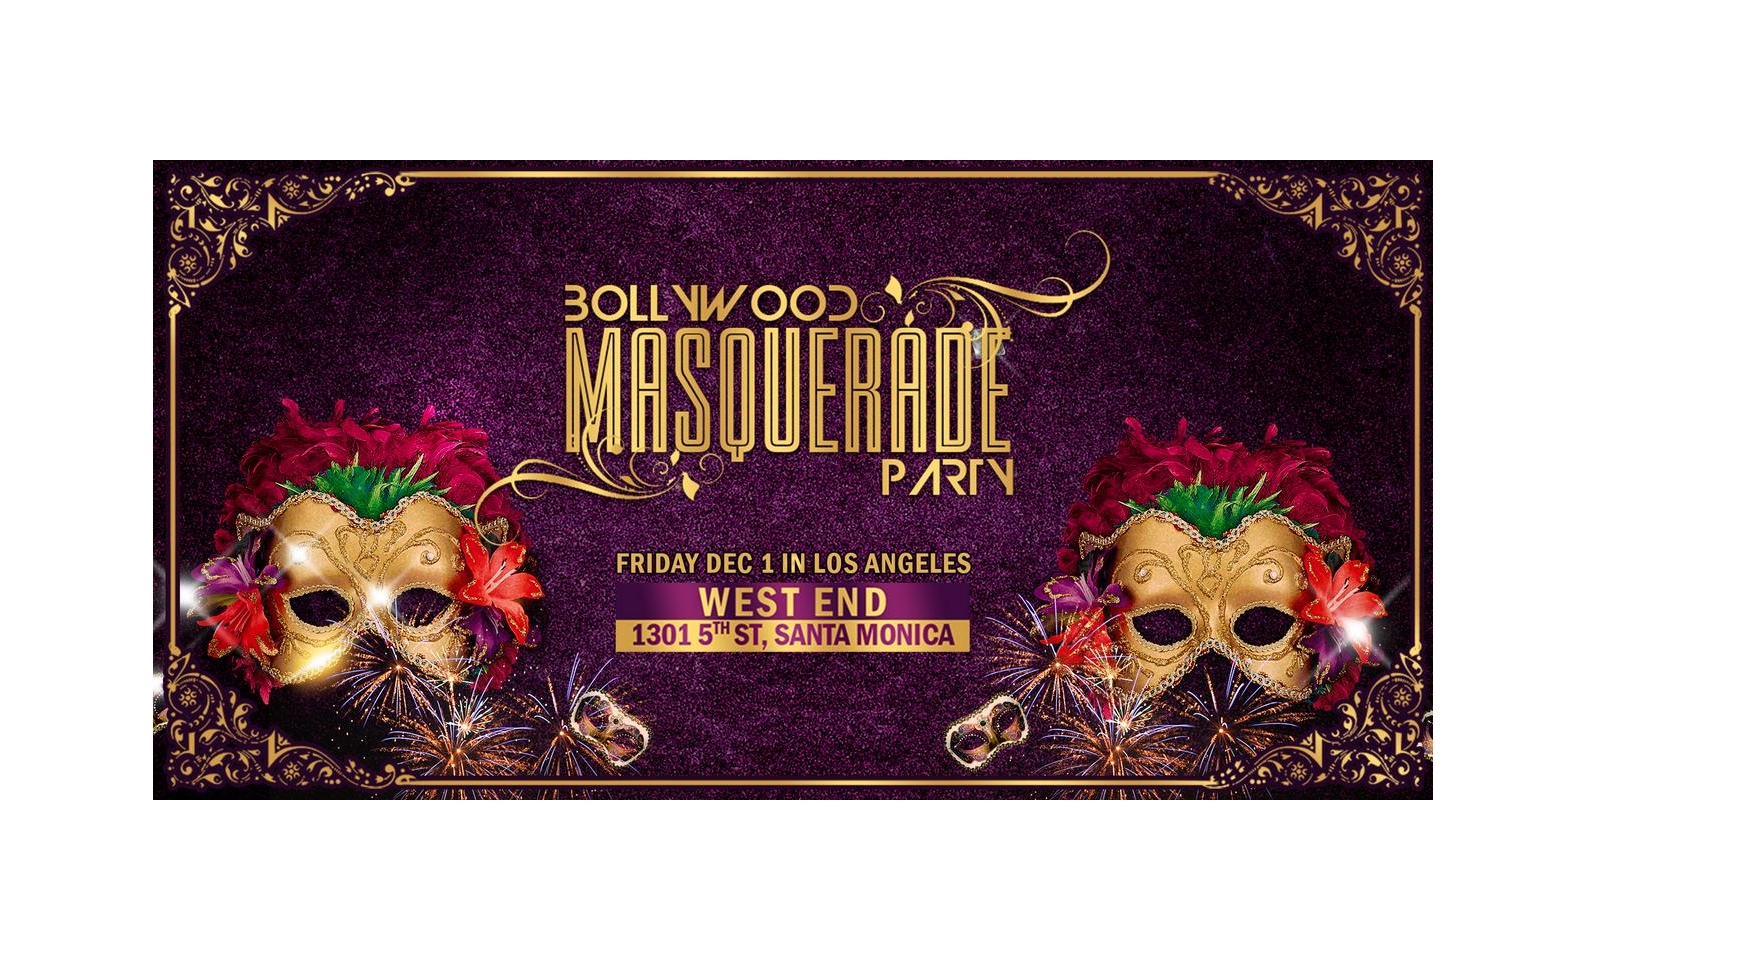 Bollywood Masquerade In Los Angeles Buy Tickets Online | Santa Monica , Fri , 2017-12-01 | ThisisShow